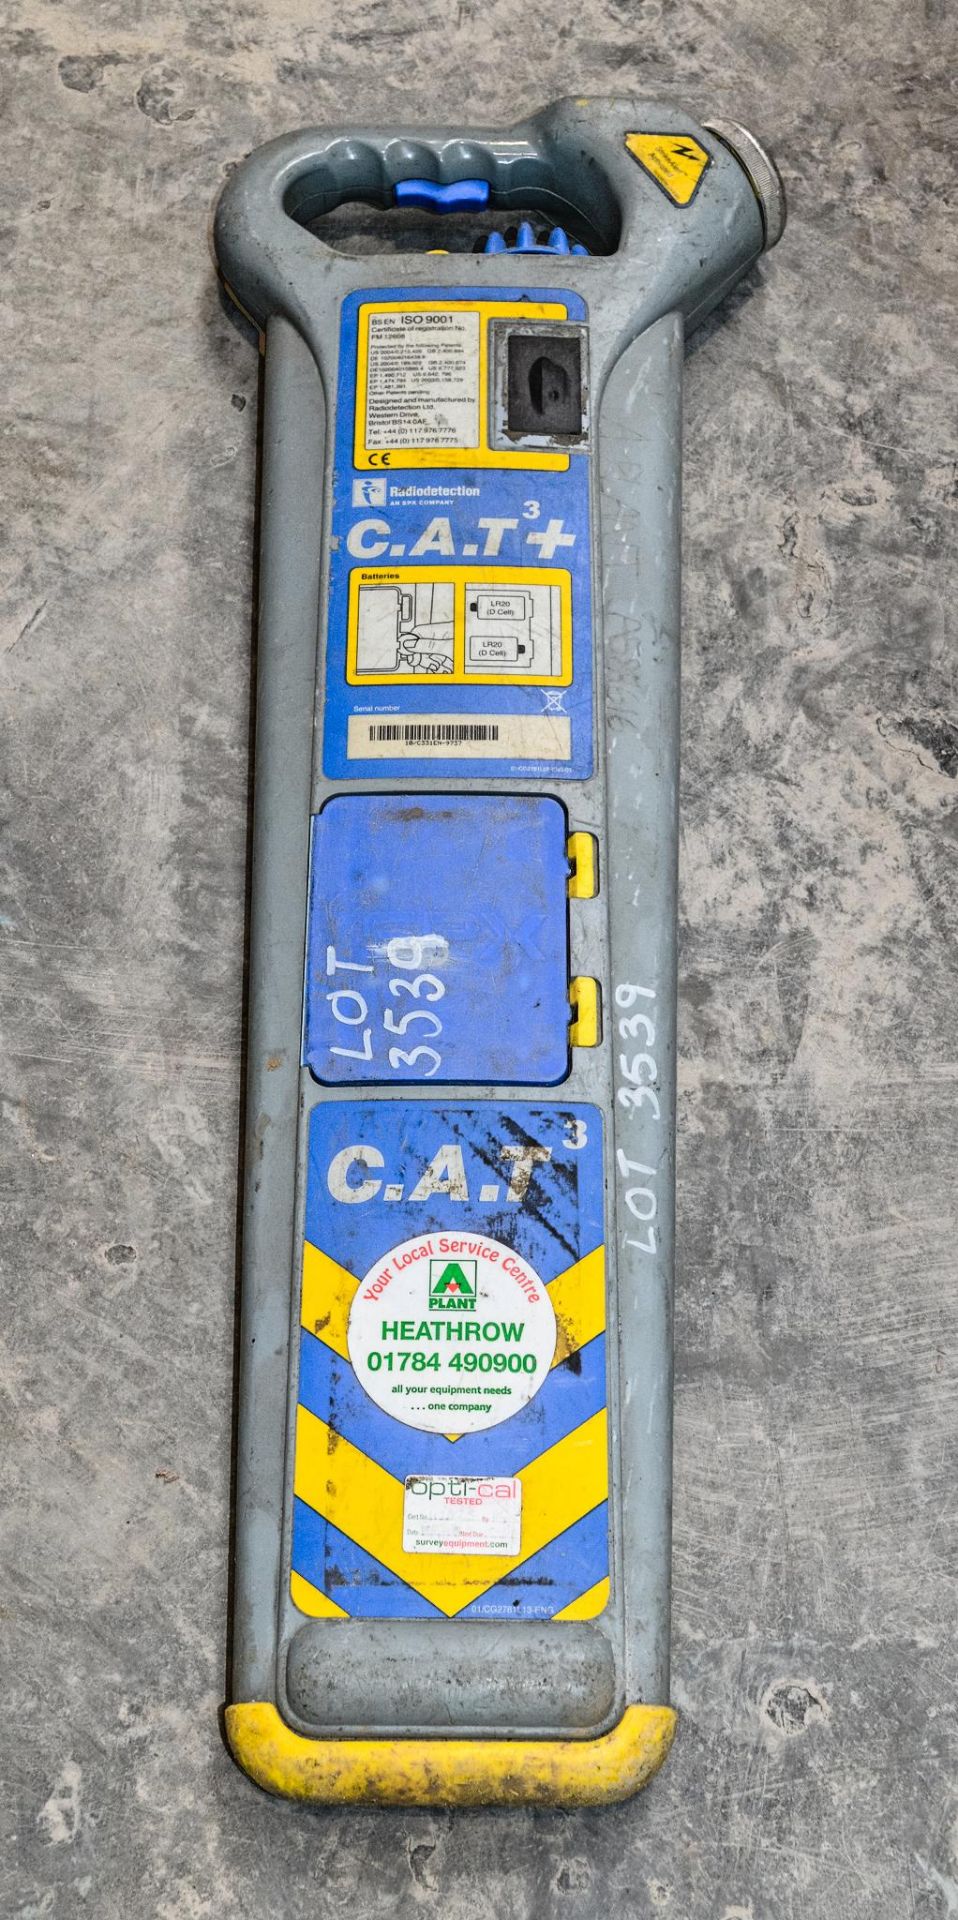 Radiodetection CAT3+ cable avoidance tool A589616